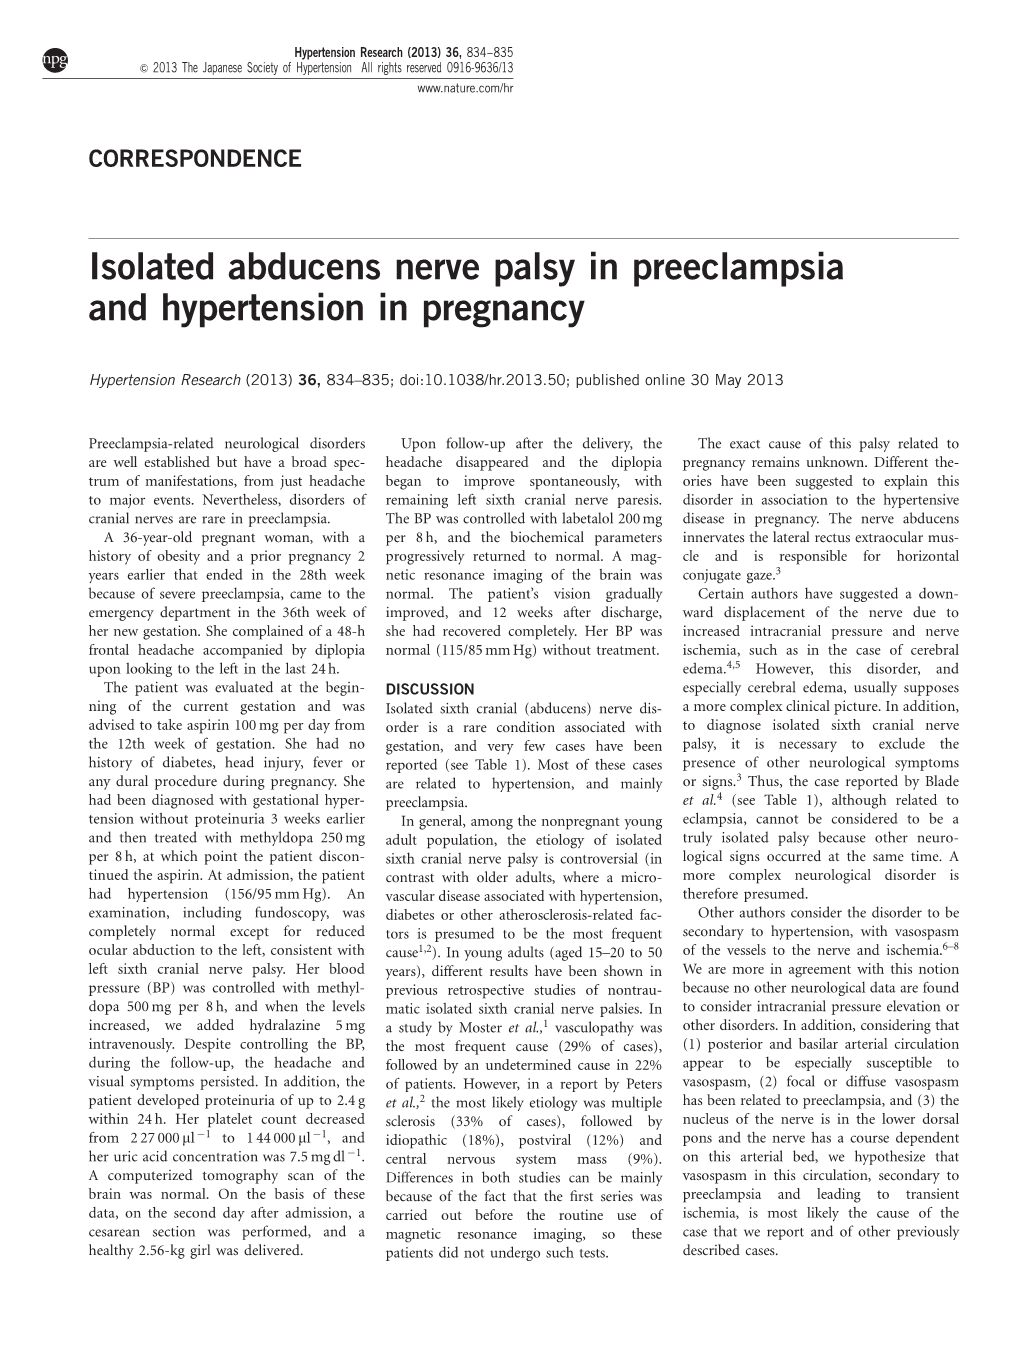 Isolated Abducens Nerve Palsy in Preeclampsia and Hypertension in Pregnancy